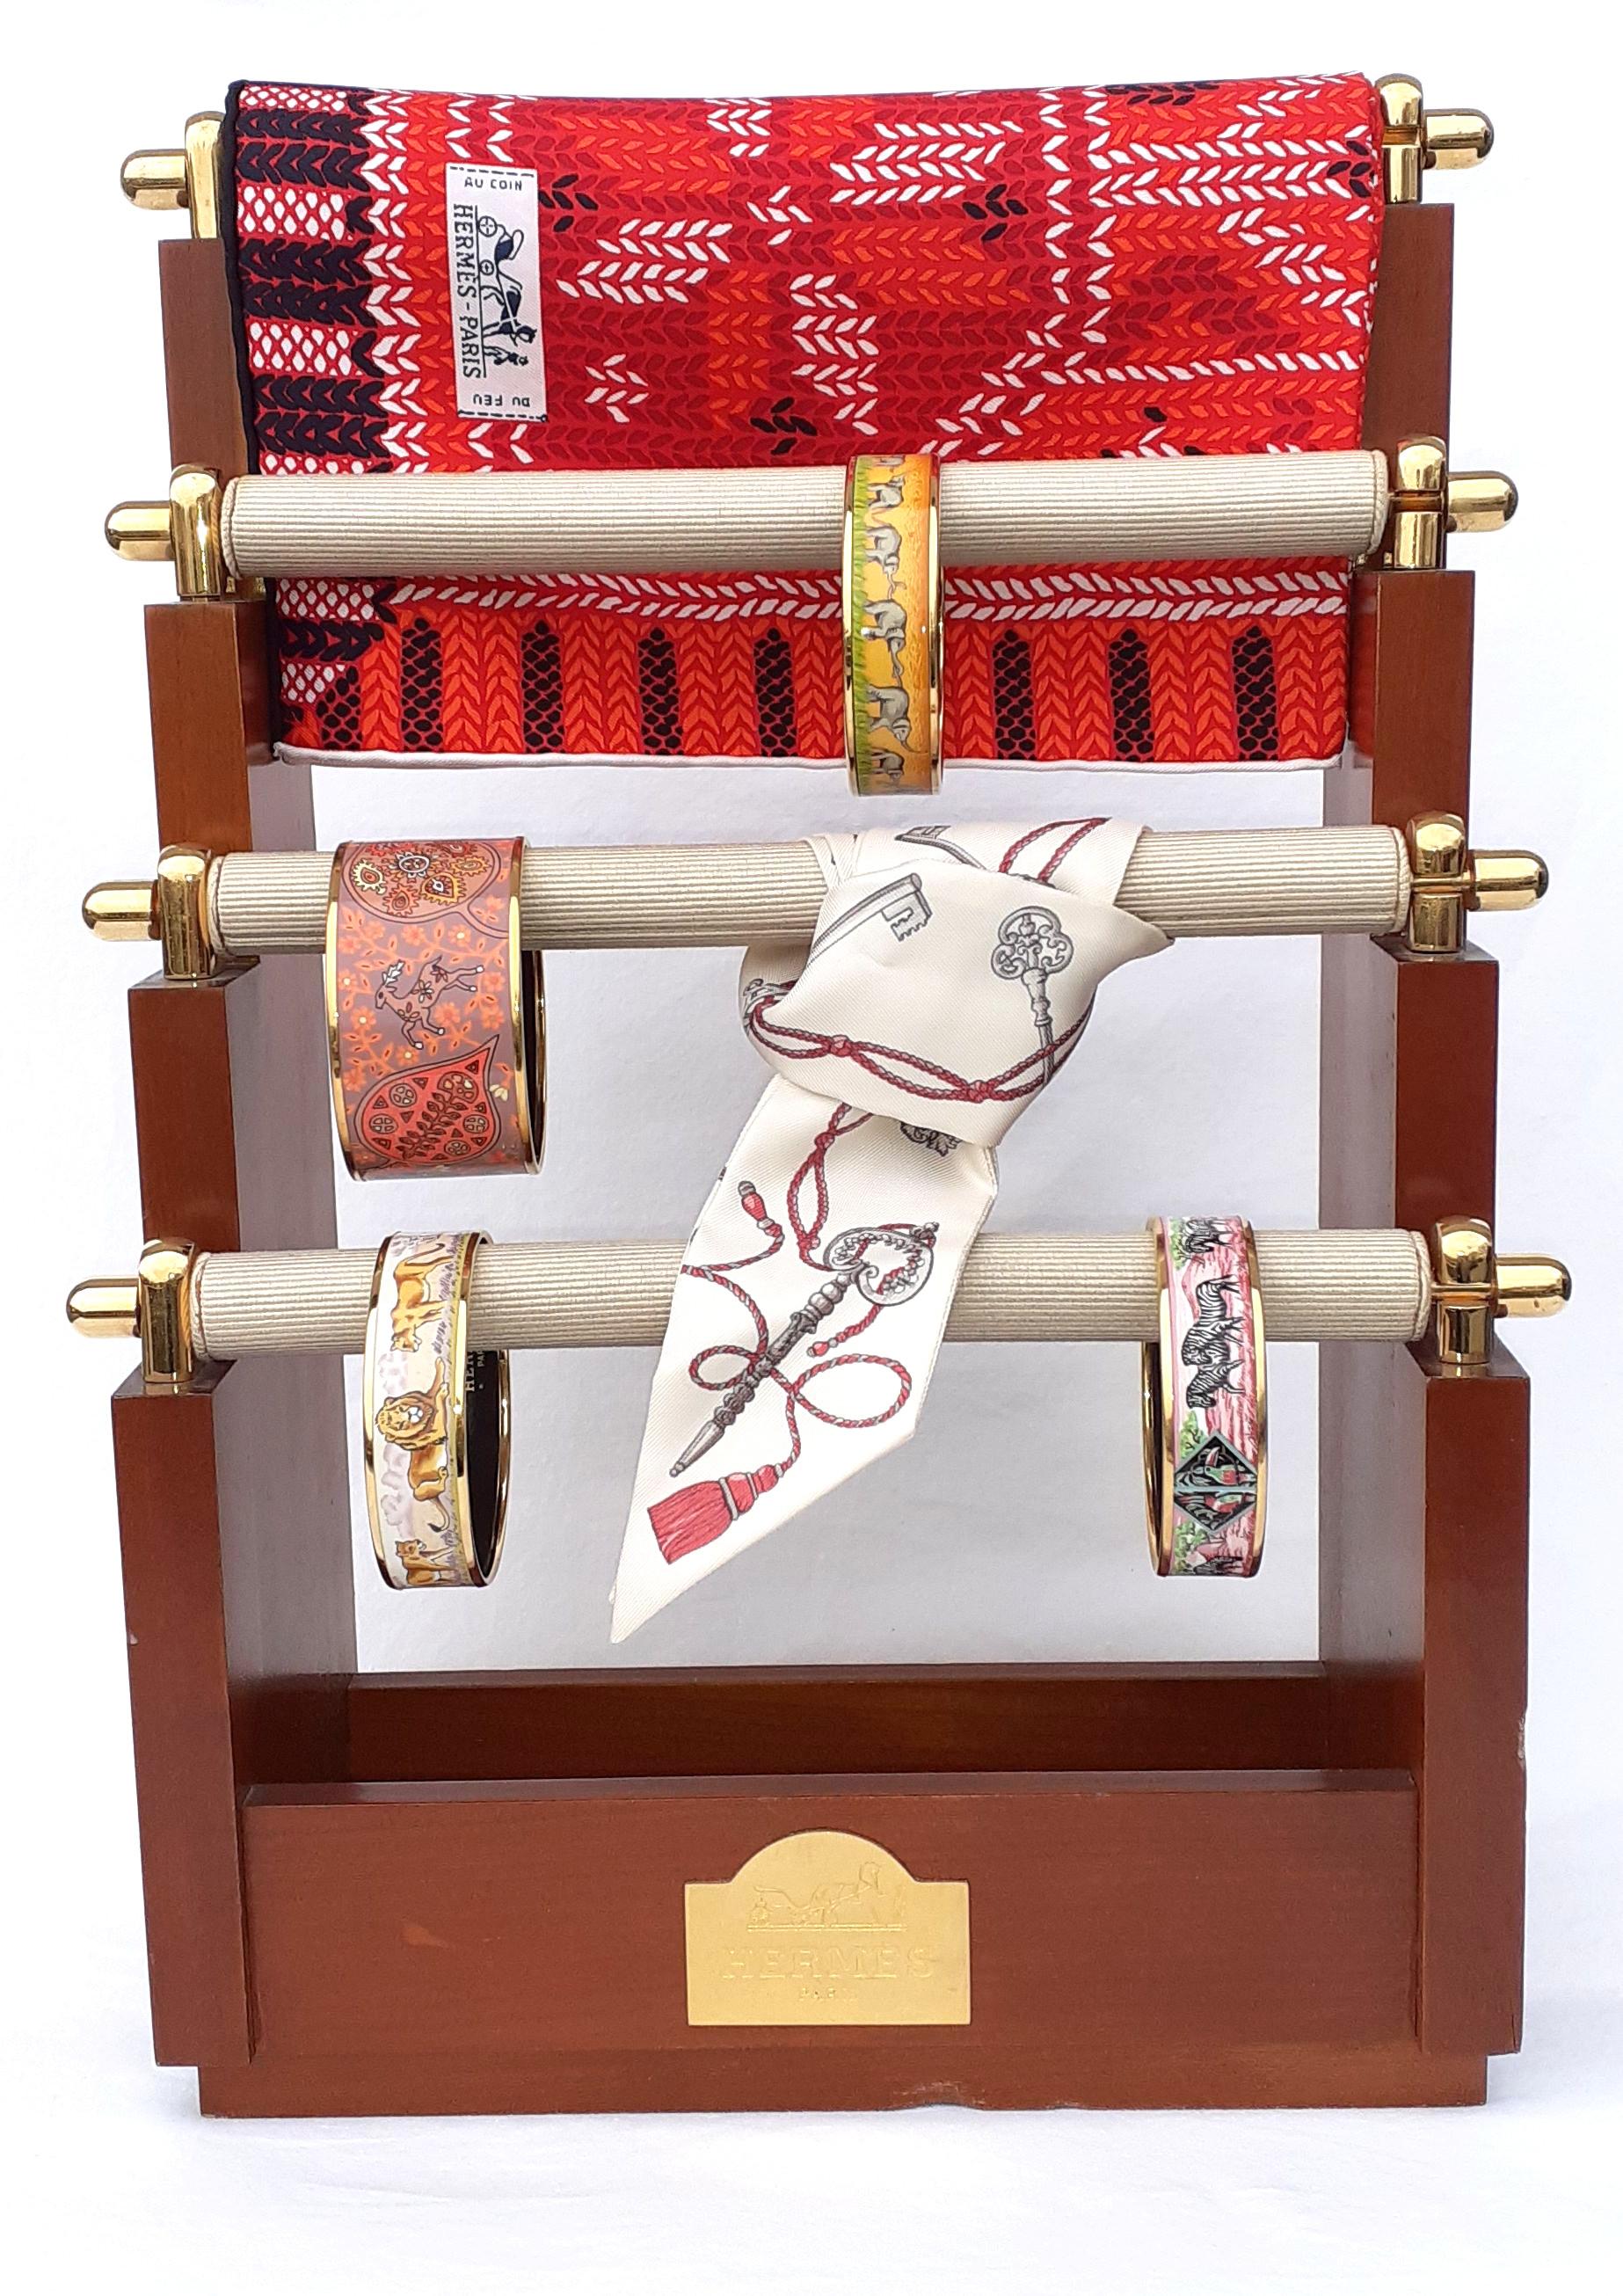 Extremely Rare Authentic Hermès Display

Shaped in an equestrian jump !

Perfect for presenting your scarves, jewelry

Vintage item from a Hermès Store

Composed of a wooden support, adorned with 4 rolls covered with beige fabric

At the bottom, a